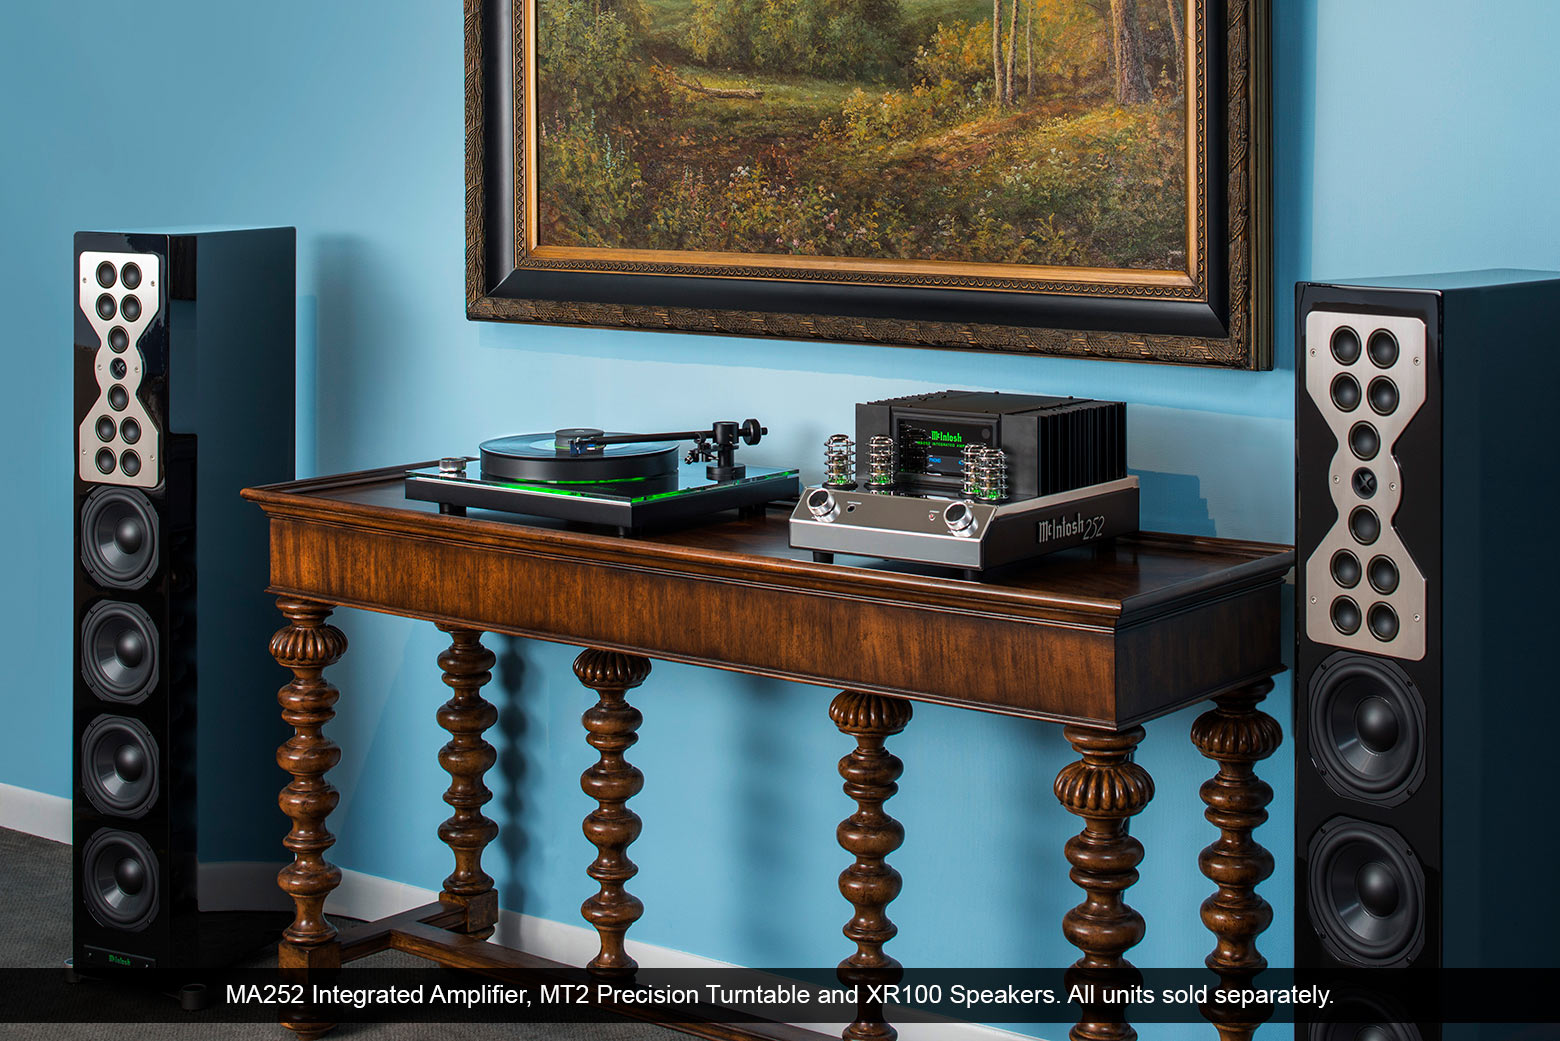 McIntosh MA252 Integrated Amplifier, MT2 Precision Turntable and XR100 Speakers.